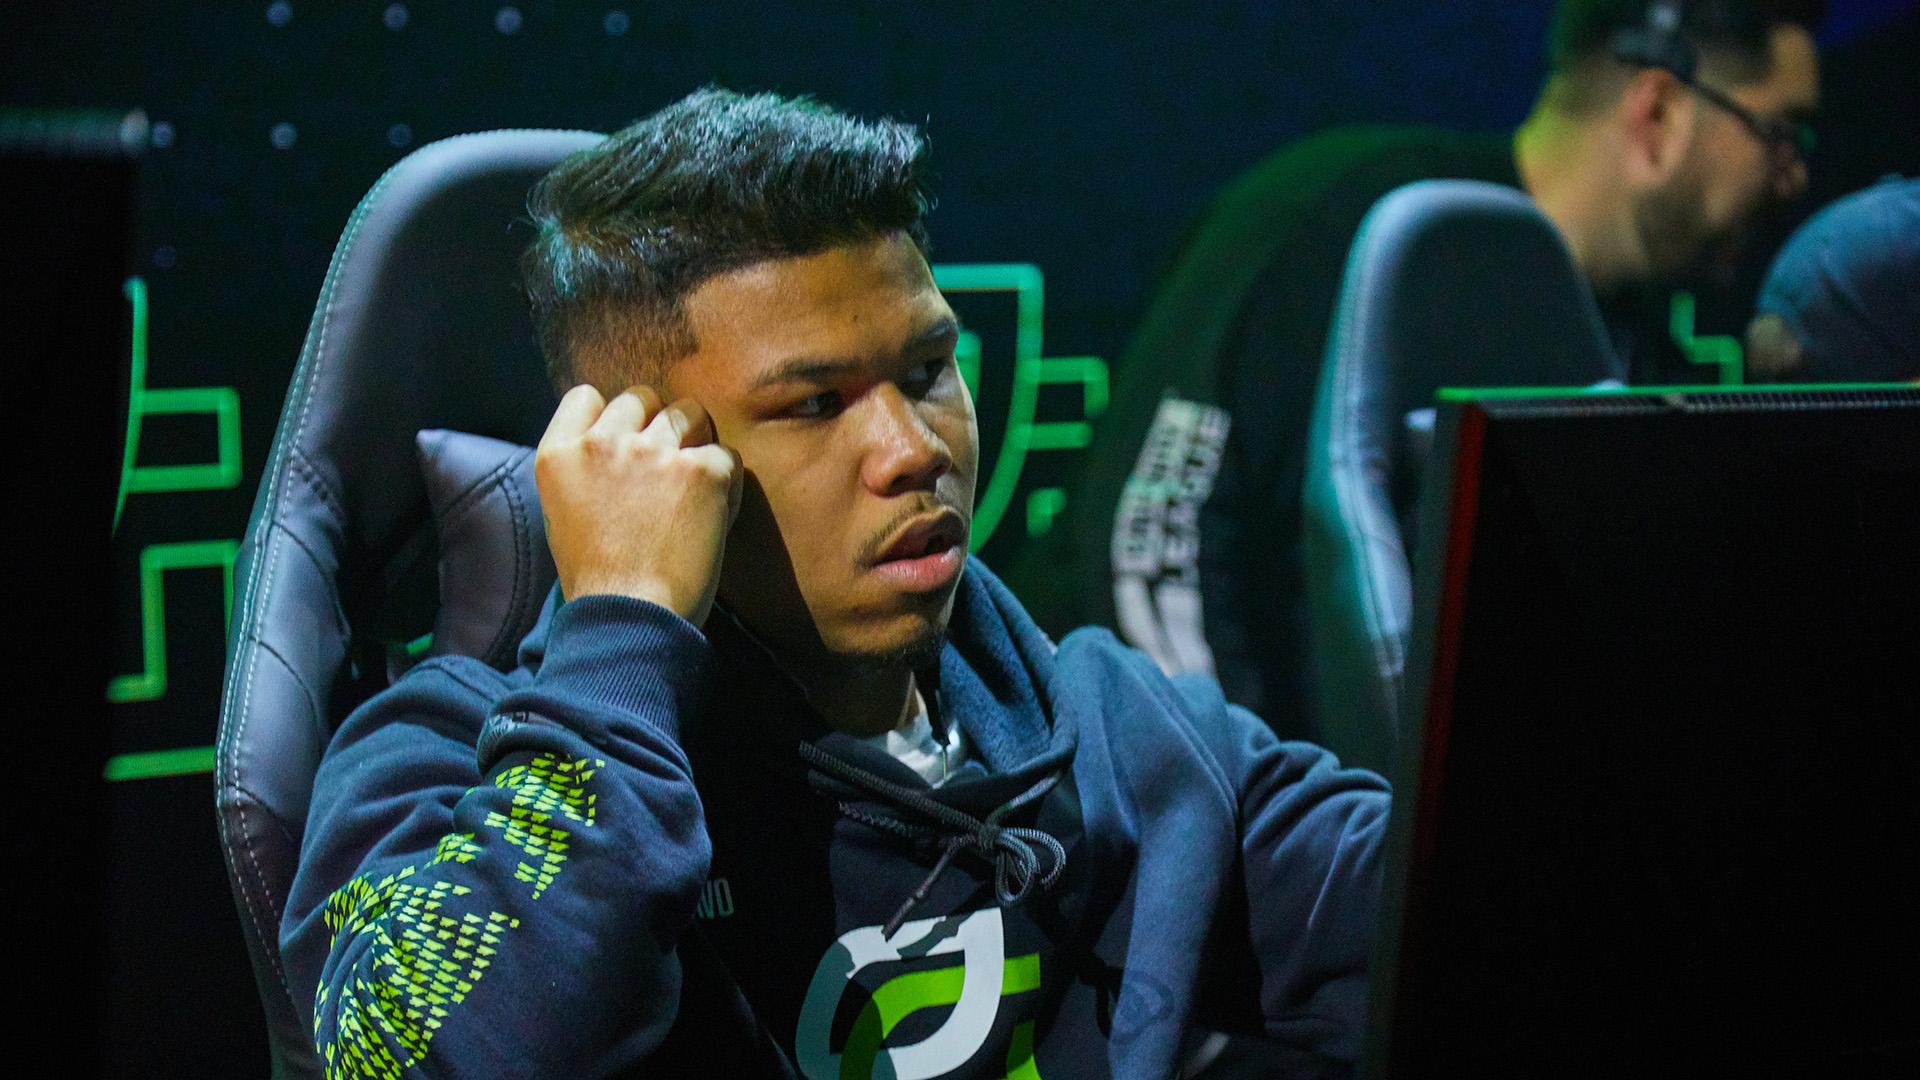 Kenny Kuavo OpTic Gaming Los Angeles CDL